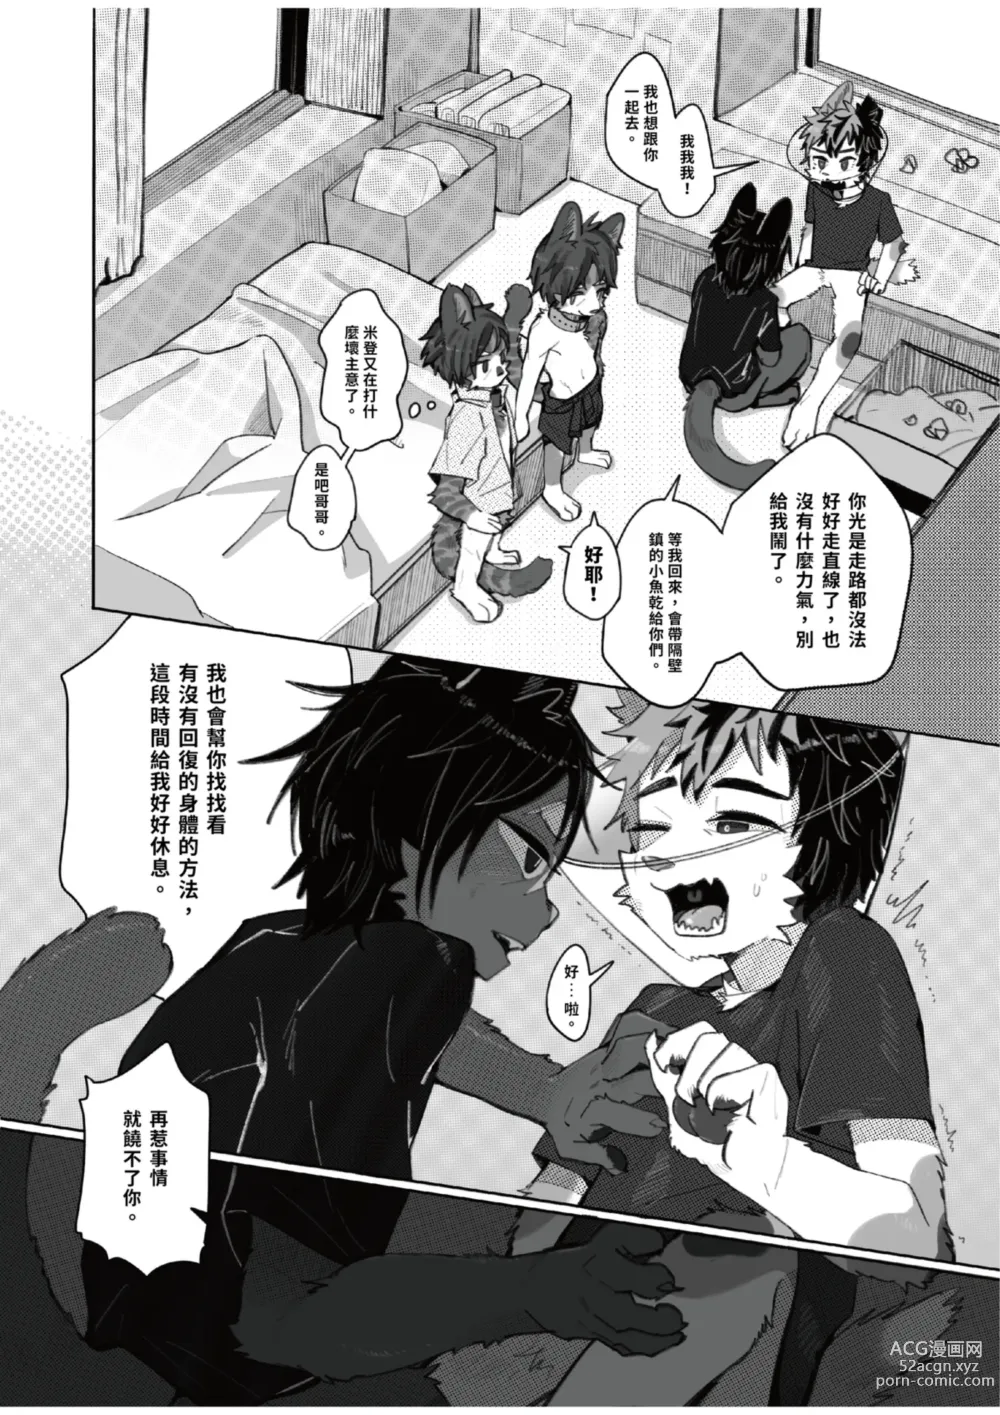 Page 8 of doujinshi 巷弄發浪 Heat Alley